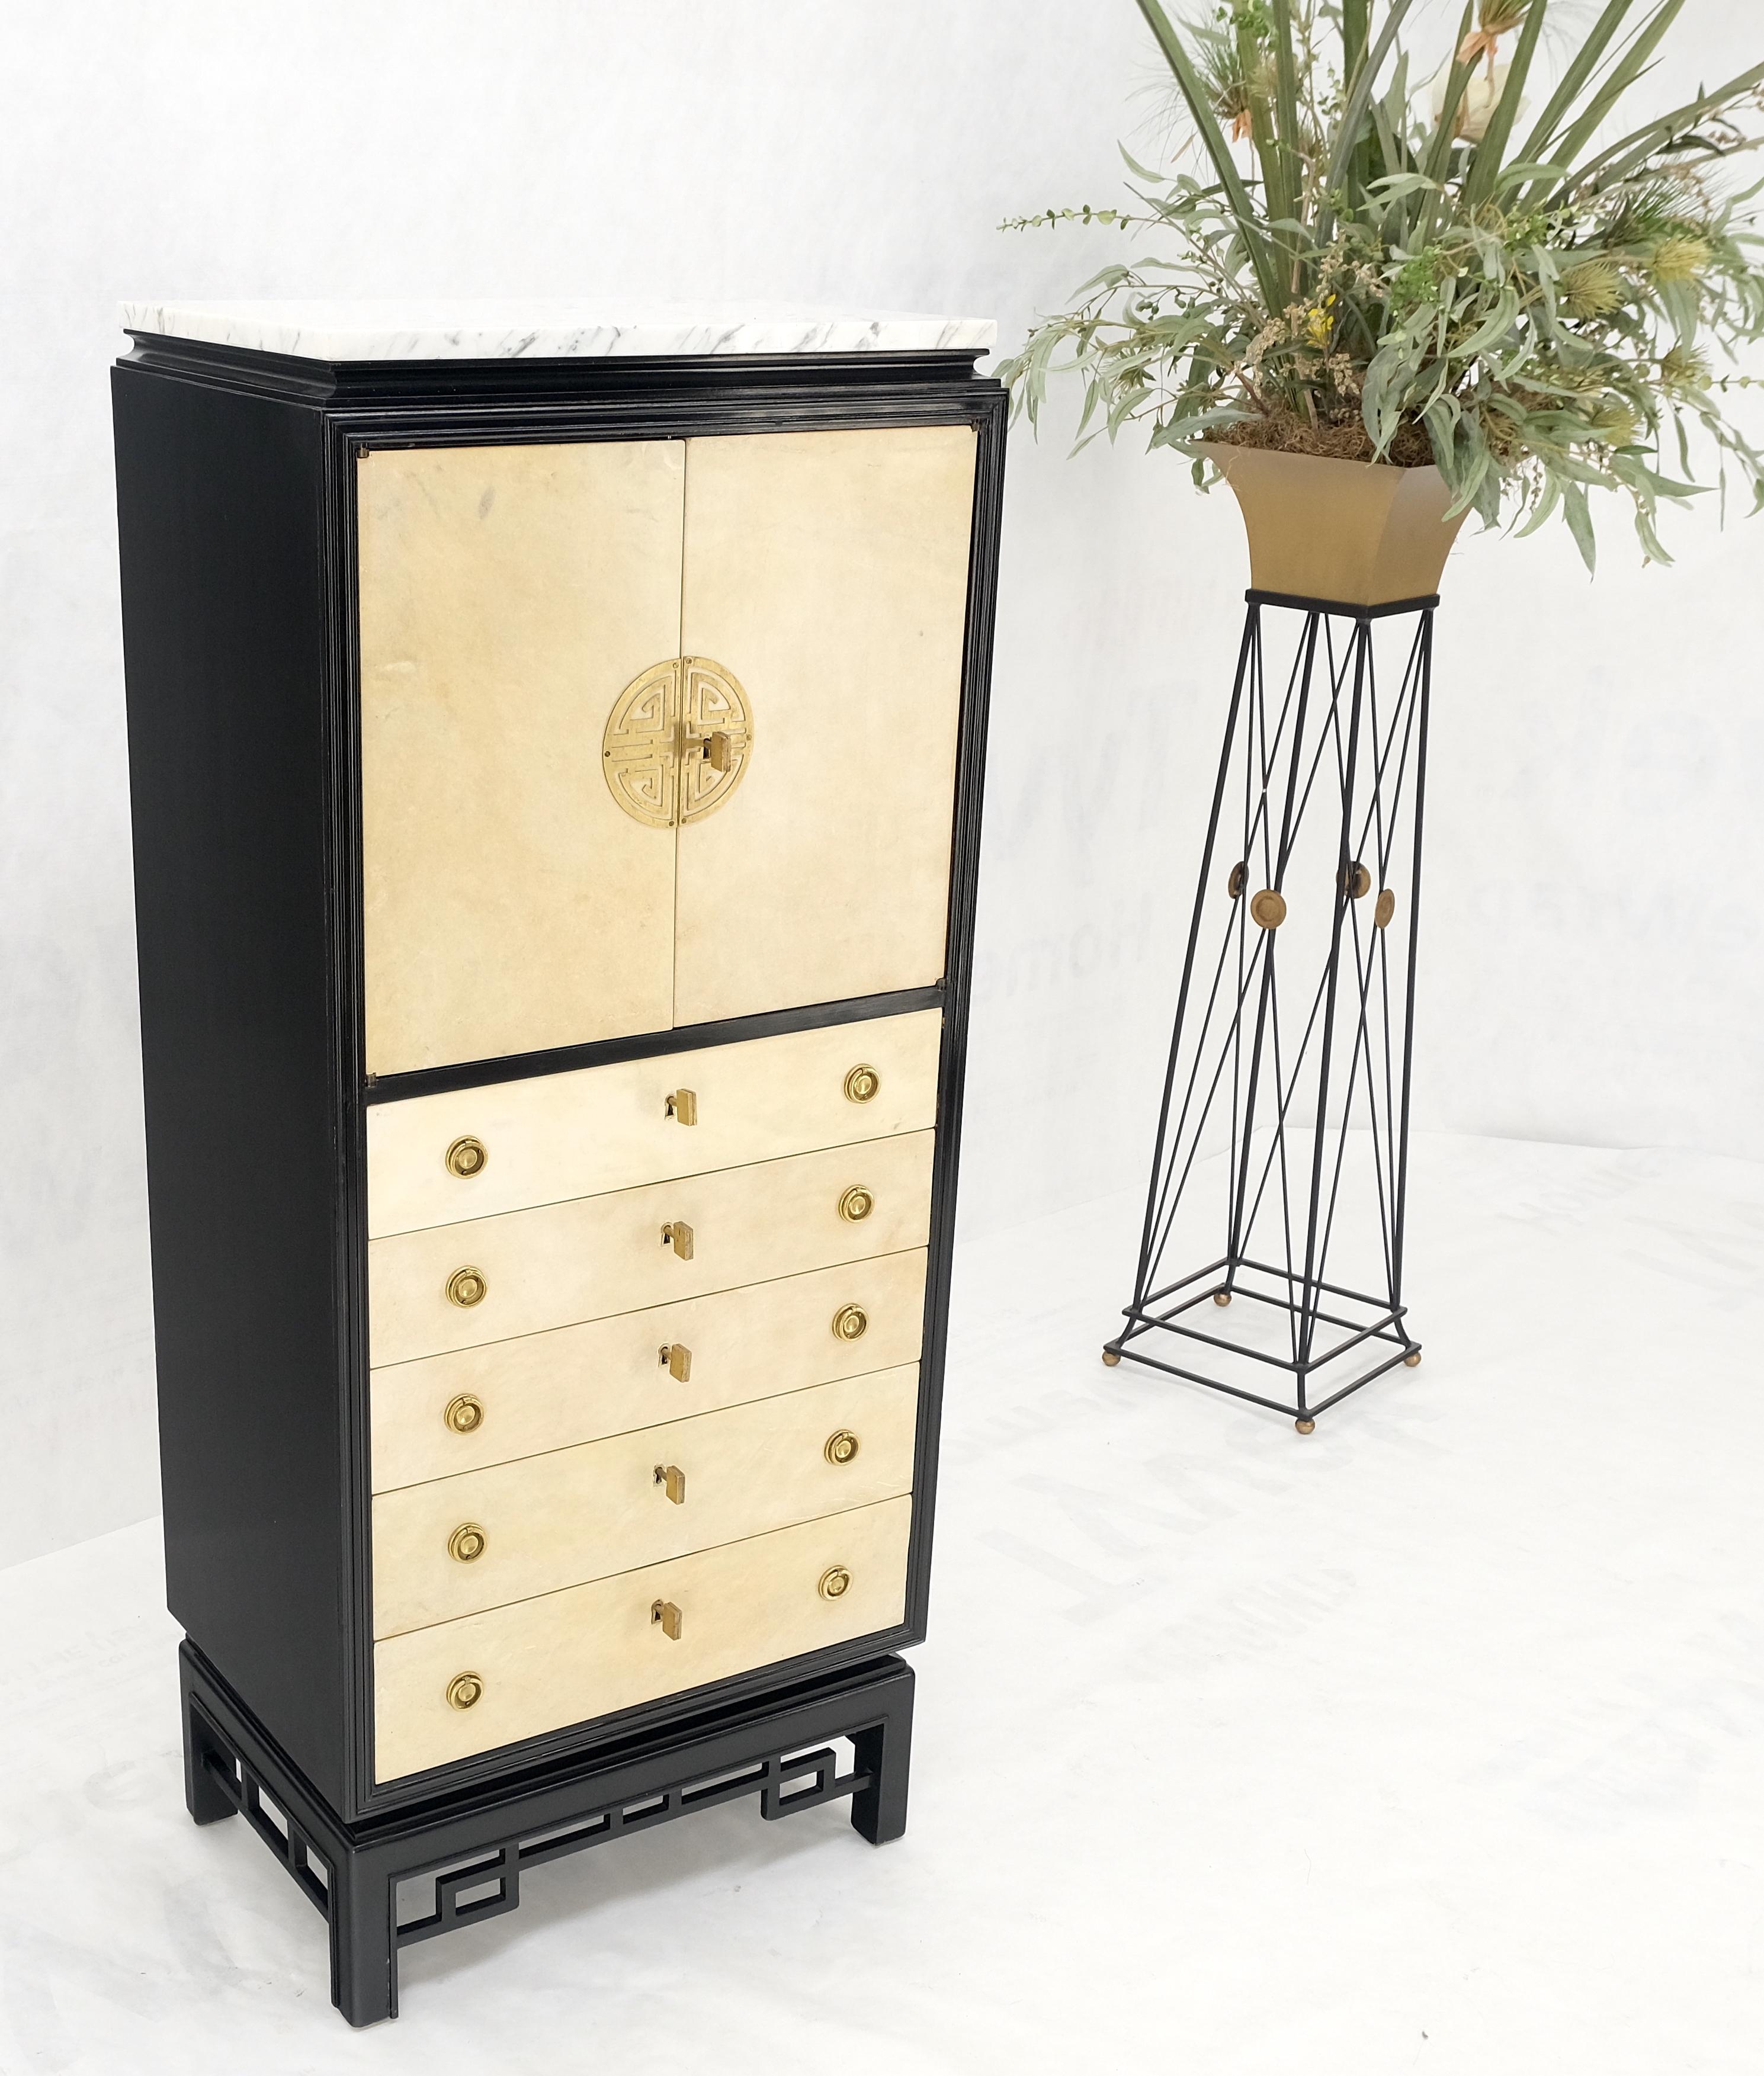 Black Lacquer Marble Top Goatskin Drawers & Double Doors Liquor Silver Cabinet For Sale 8